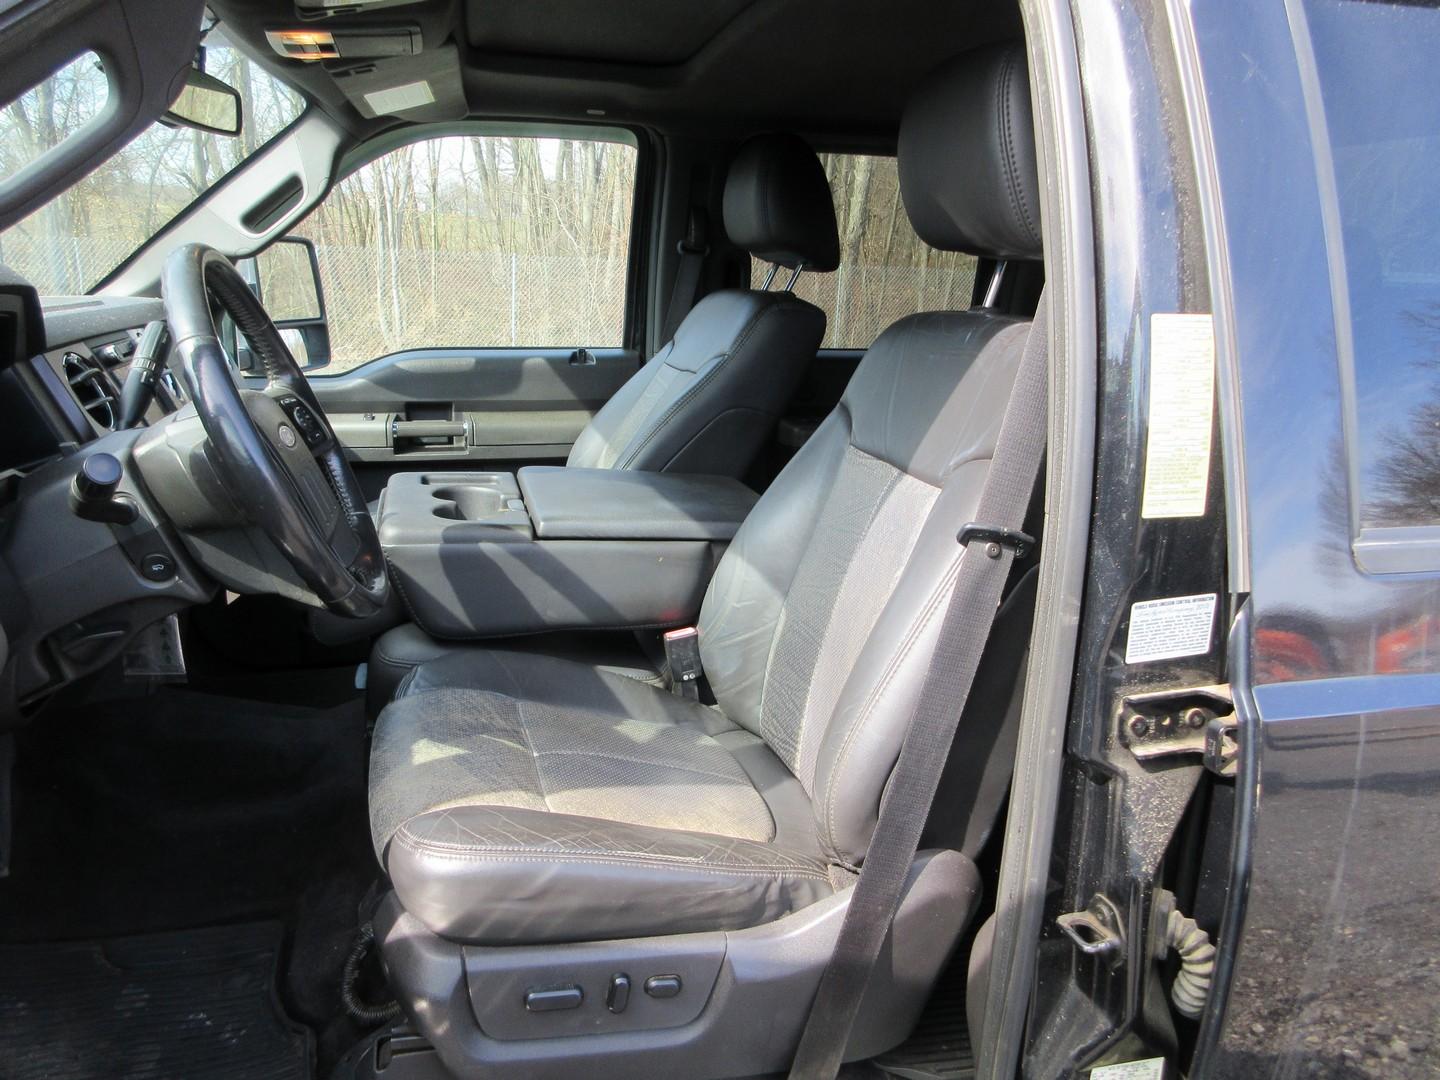 2011 Ford F-450 Lariat S/A Utility Truck